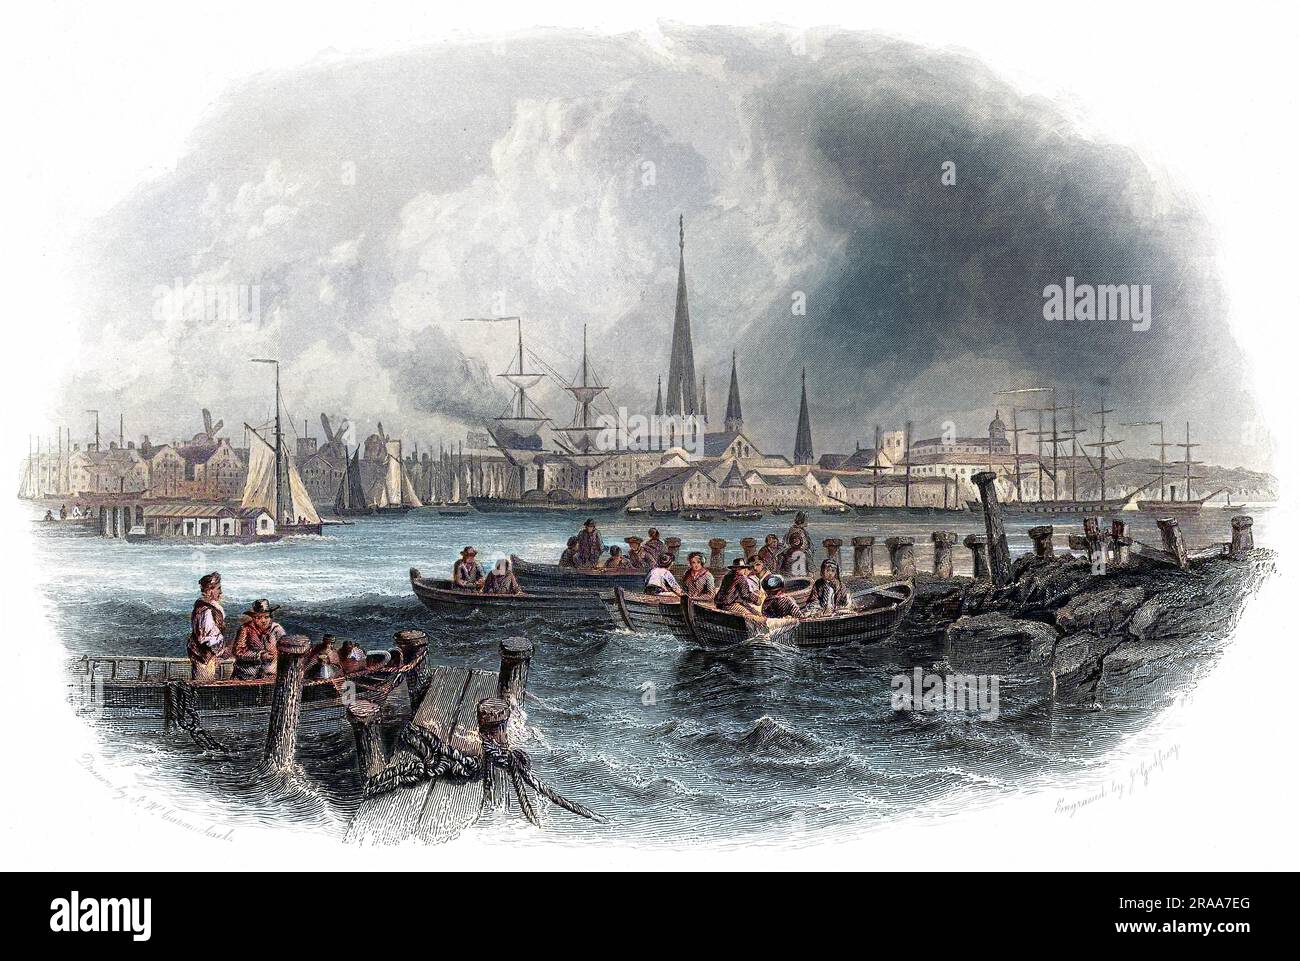 Kiel, Germany: Distant view of the Baltic seaport, which won't be linked to the North Sea until the construction of the Kiel canal in the 1880s/90s.     Date: circa 1840 Stock Photo